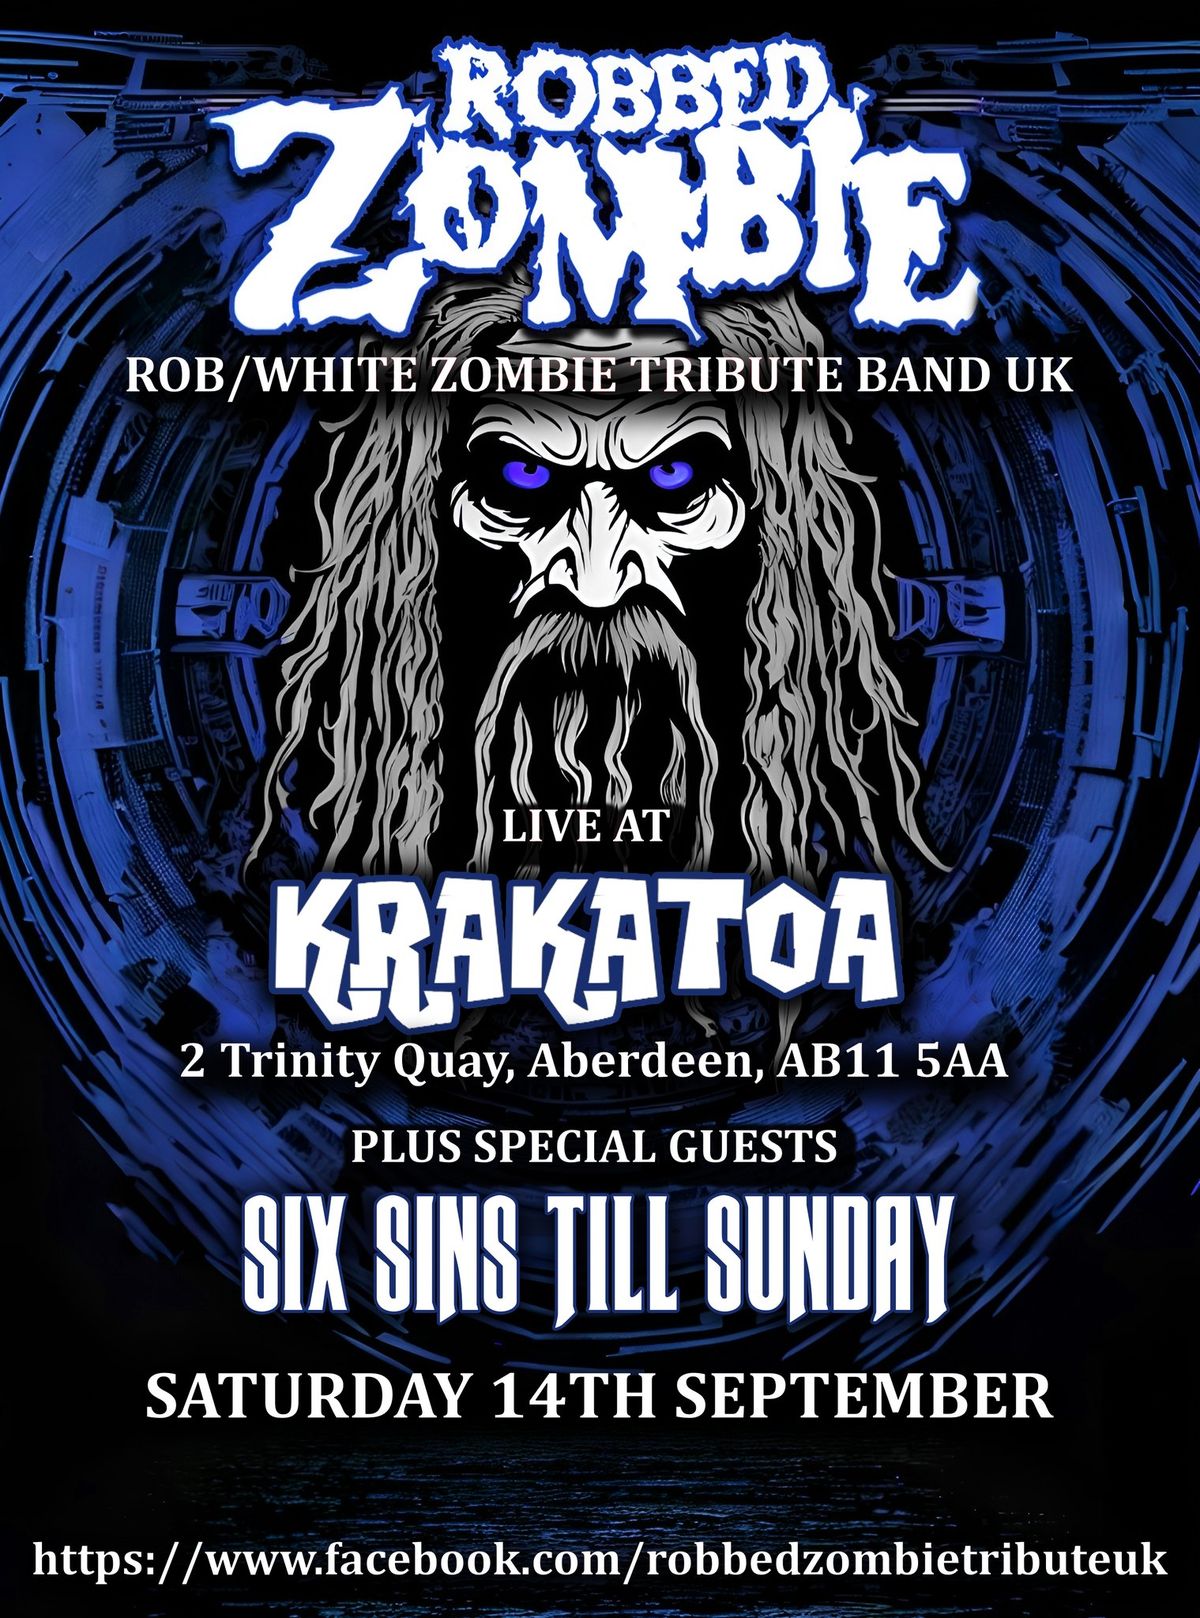 ROB \/ WHITE ZOMBIE TRIBUTE - ROBBED ZOMBIE plus support from  SIX SINS TILL SUNDAY